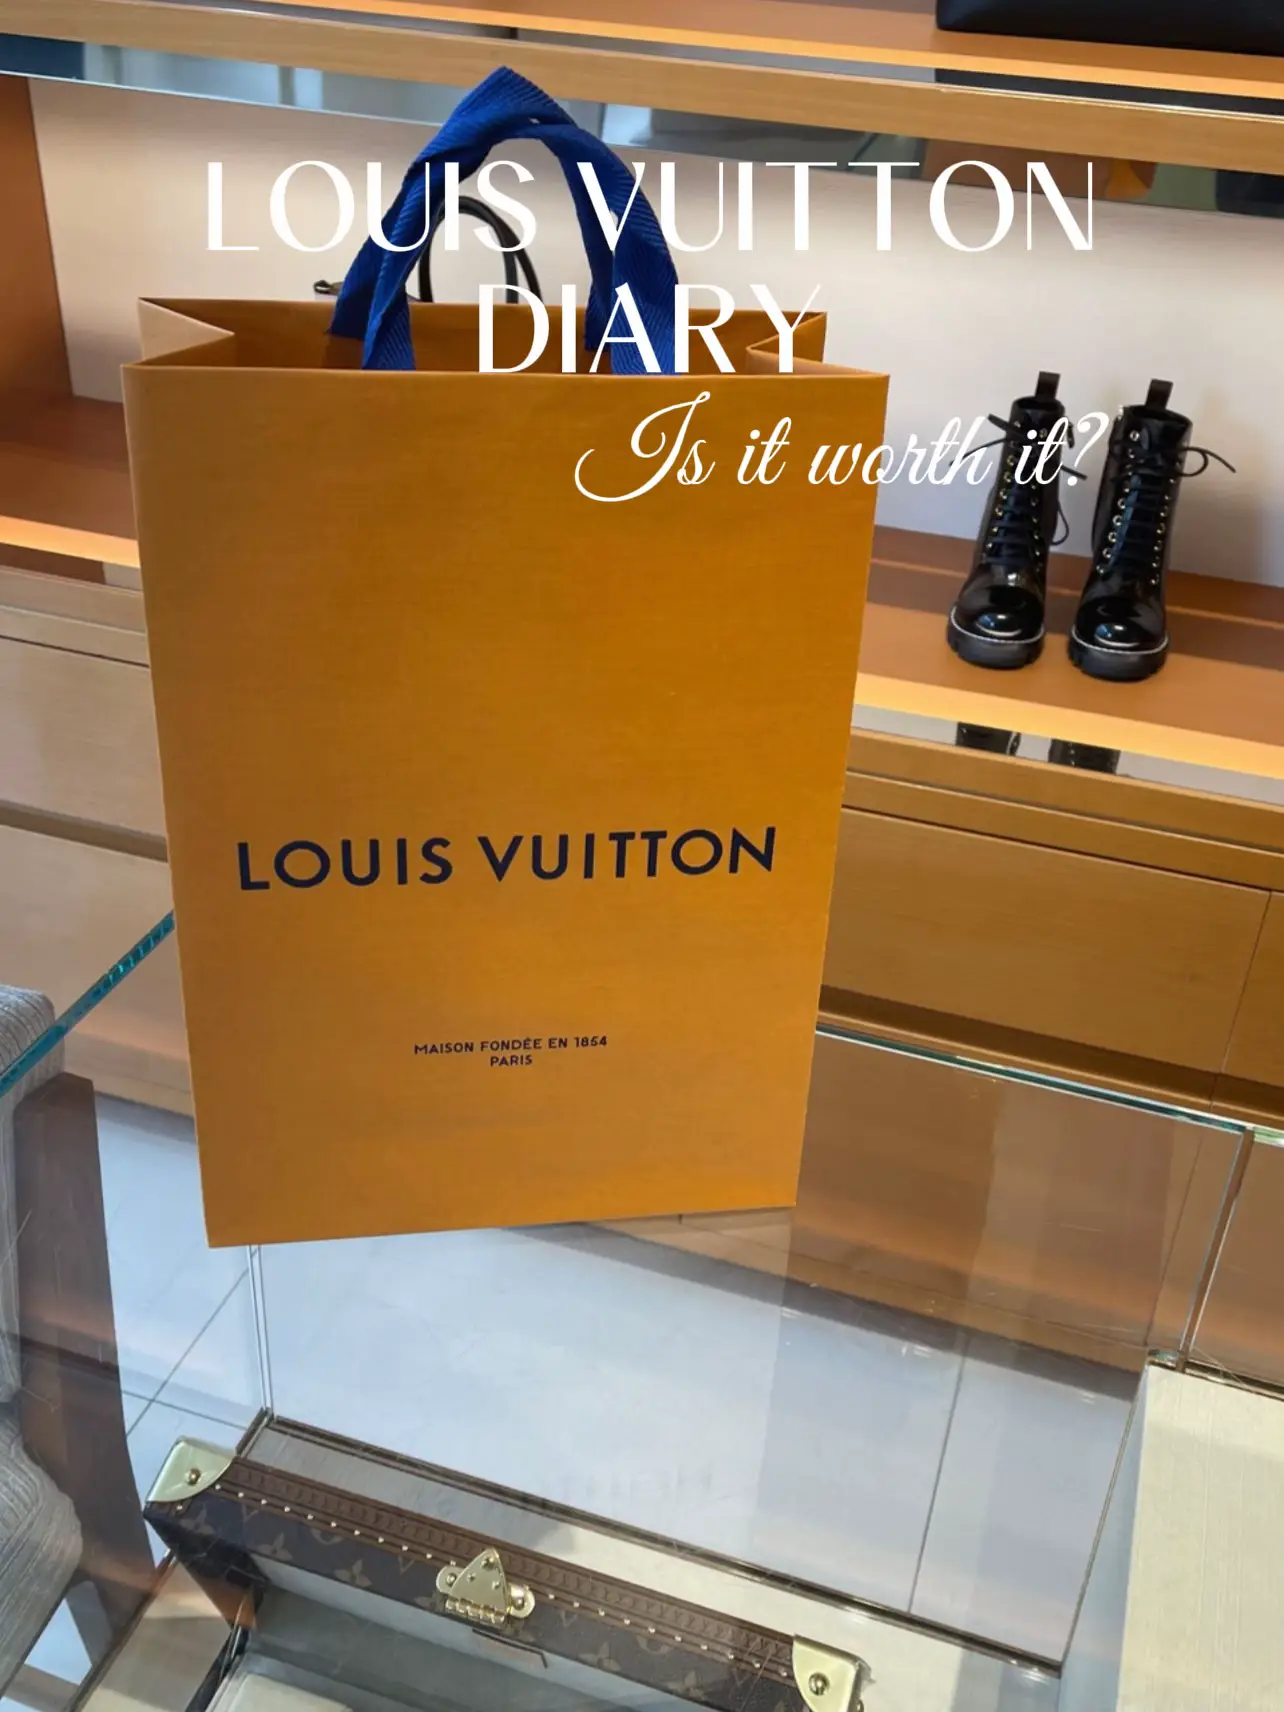 LOUIS VUITTON DIARY - is it worth it?, Gallery posted by Emma Eva